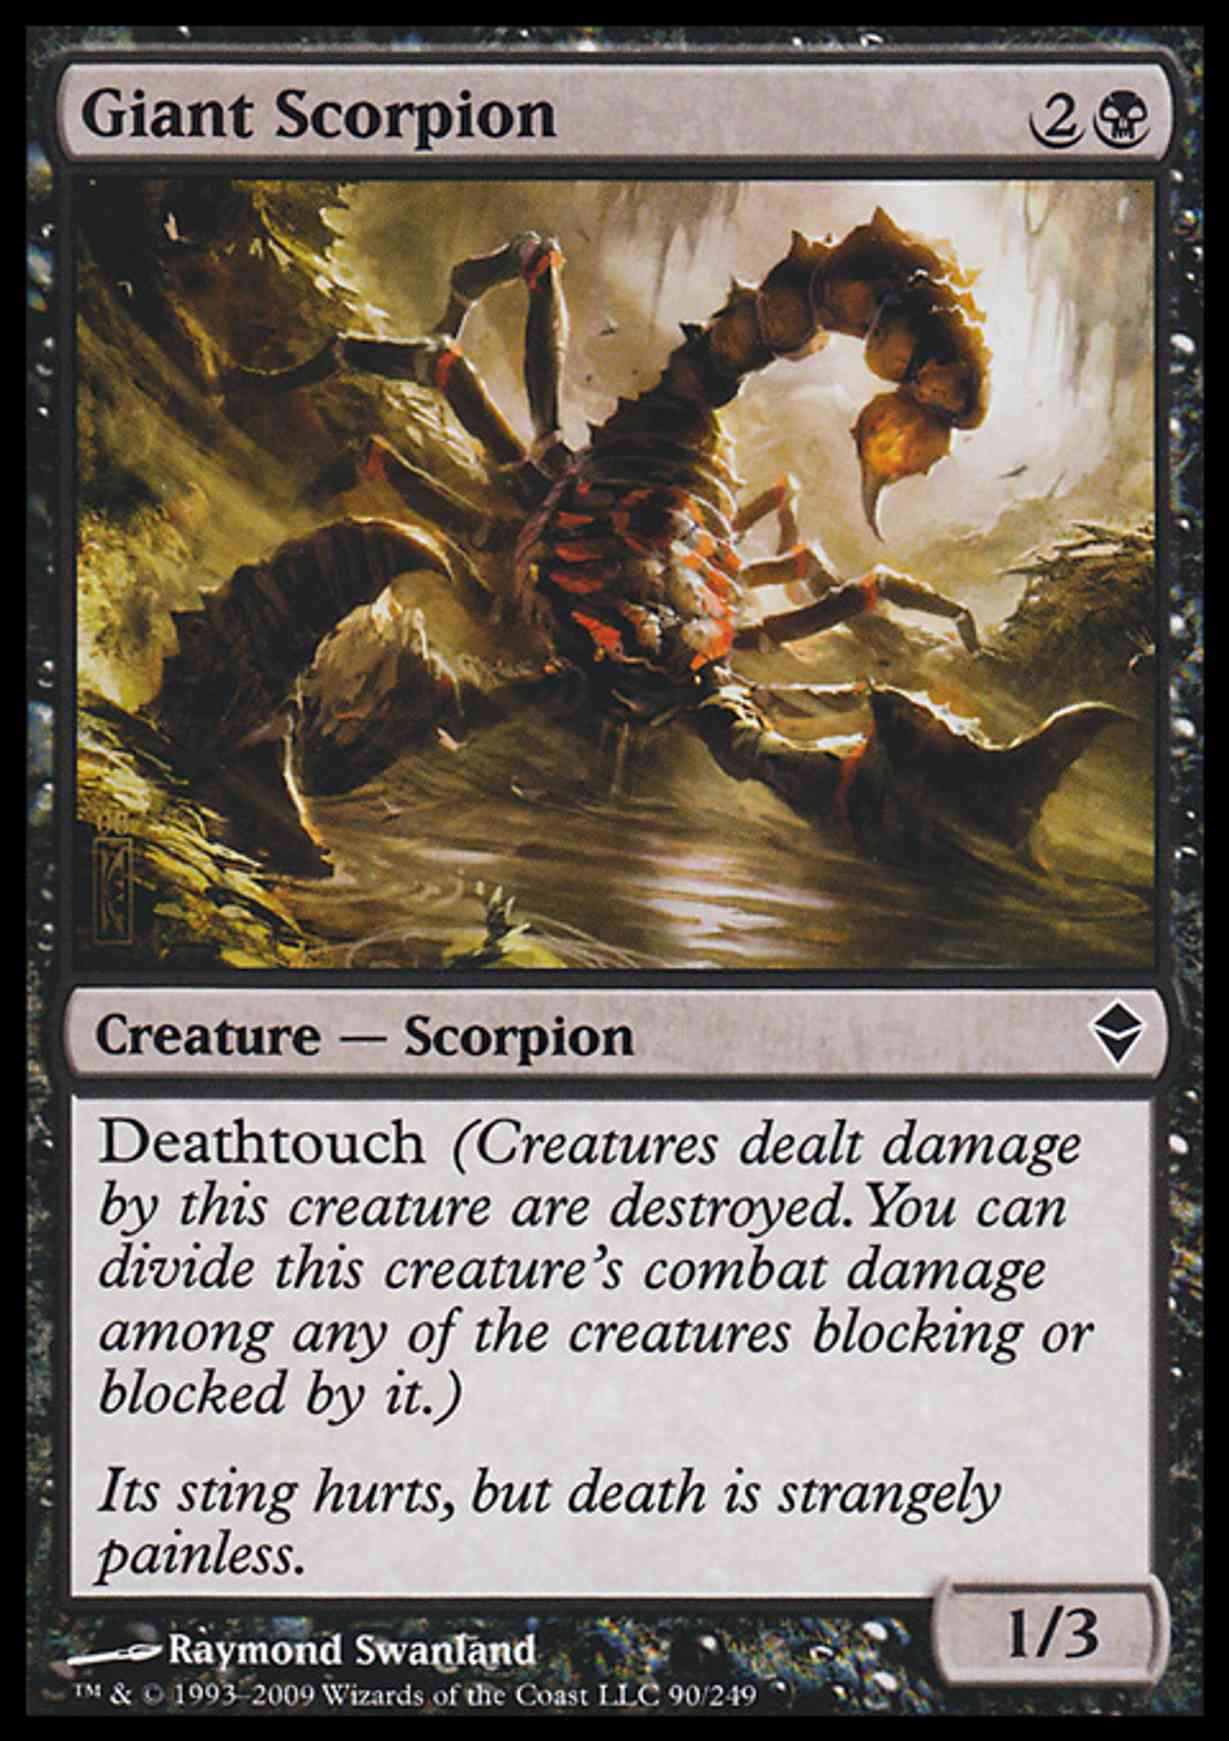 Giant Scorpion magic card front